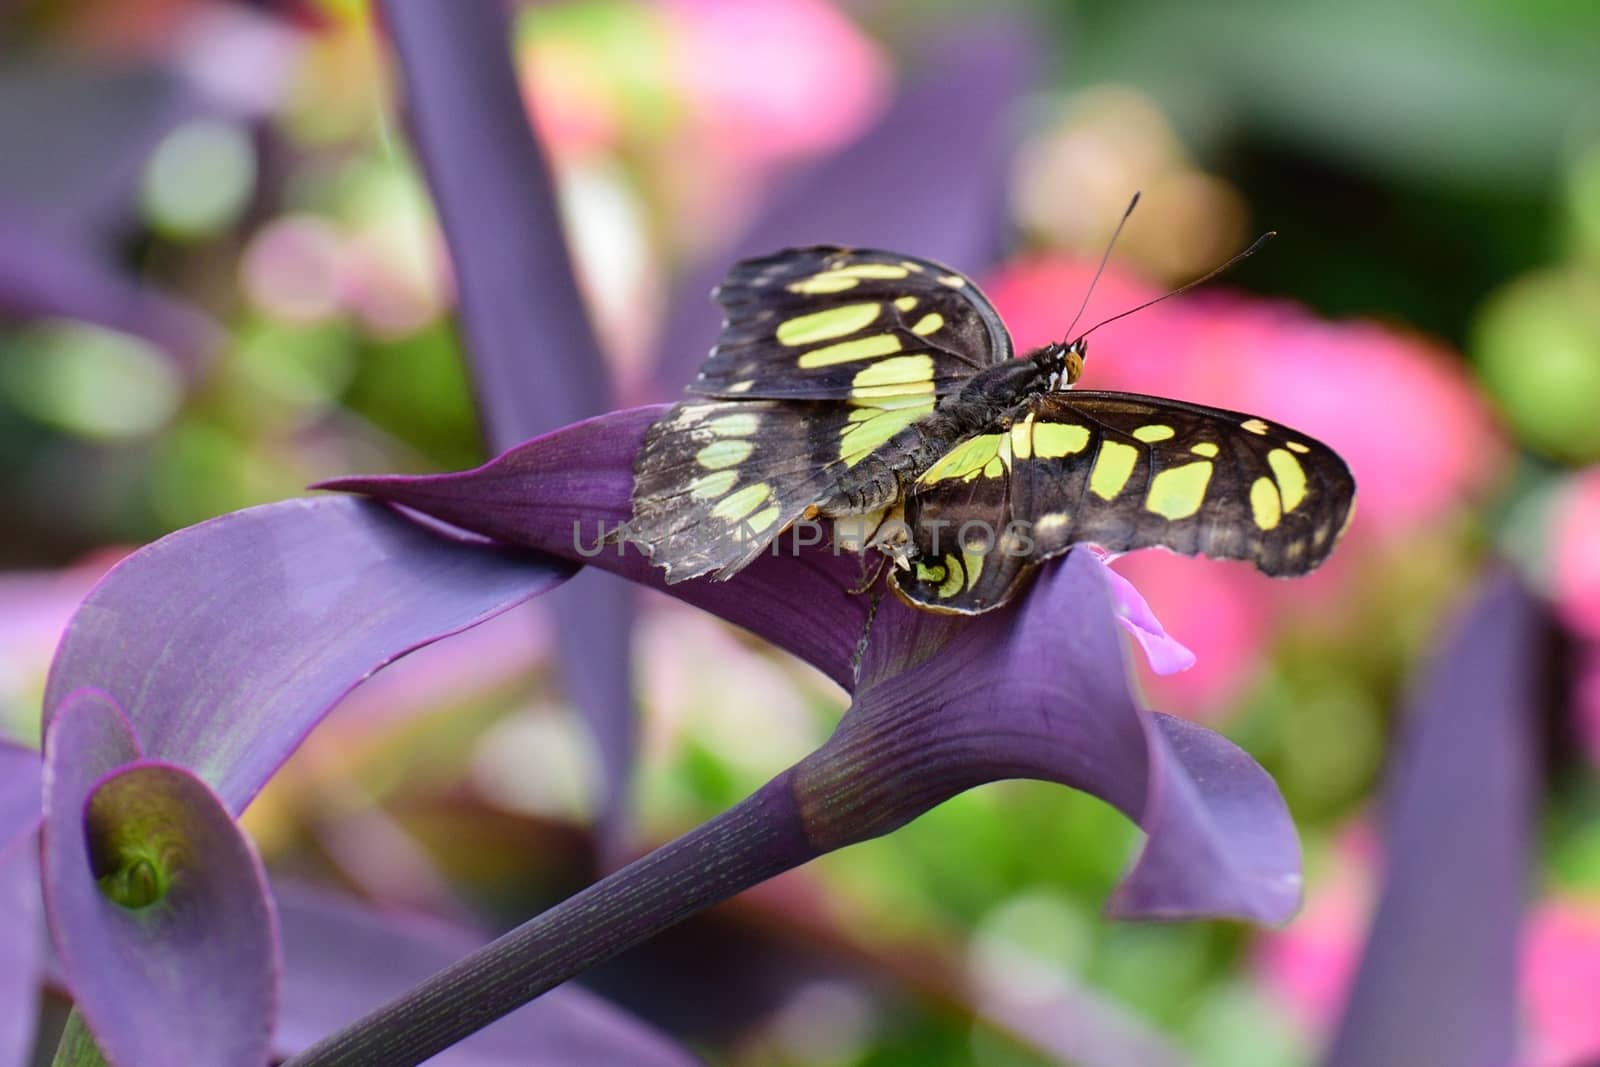 Black and yellow butterfly on purple flower